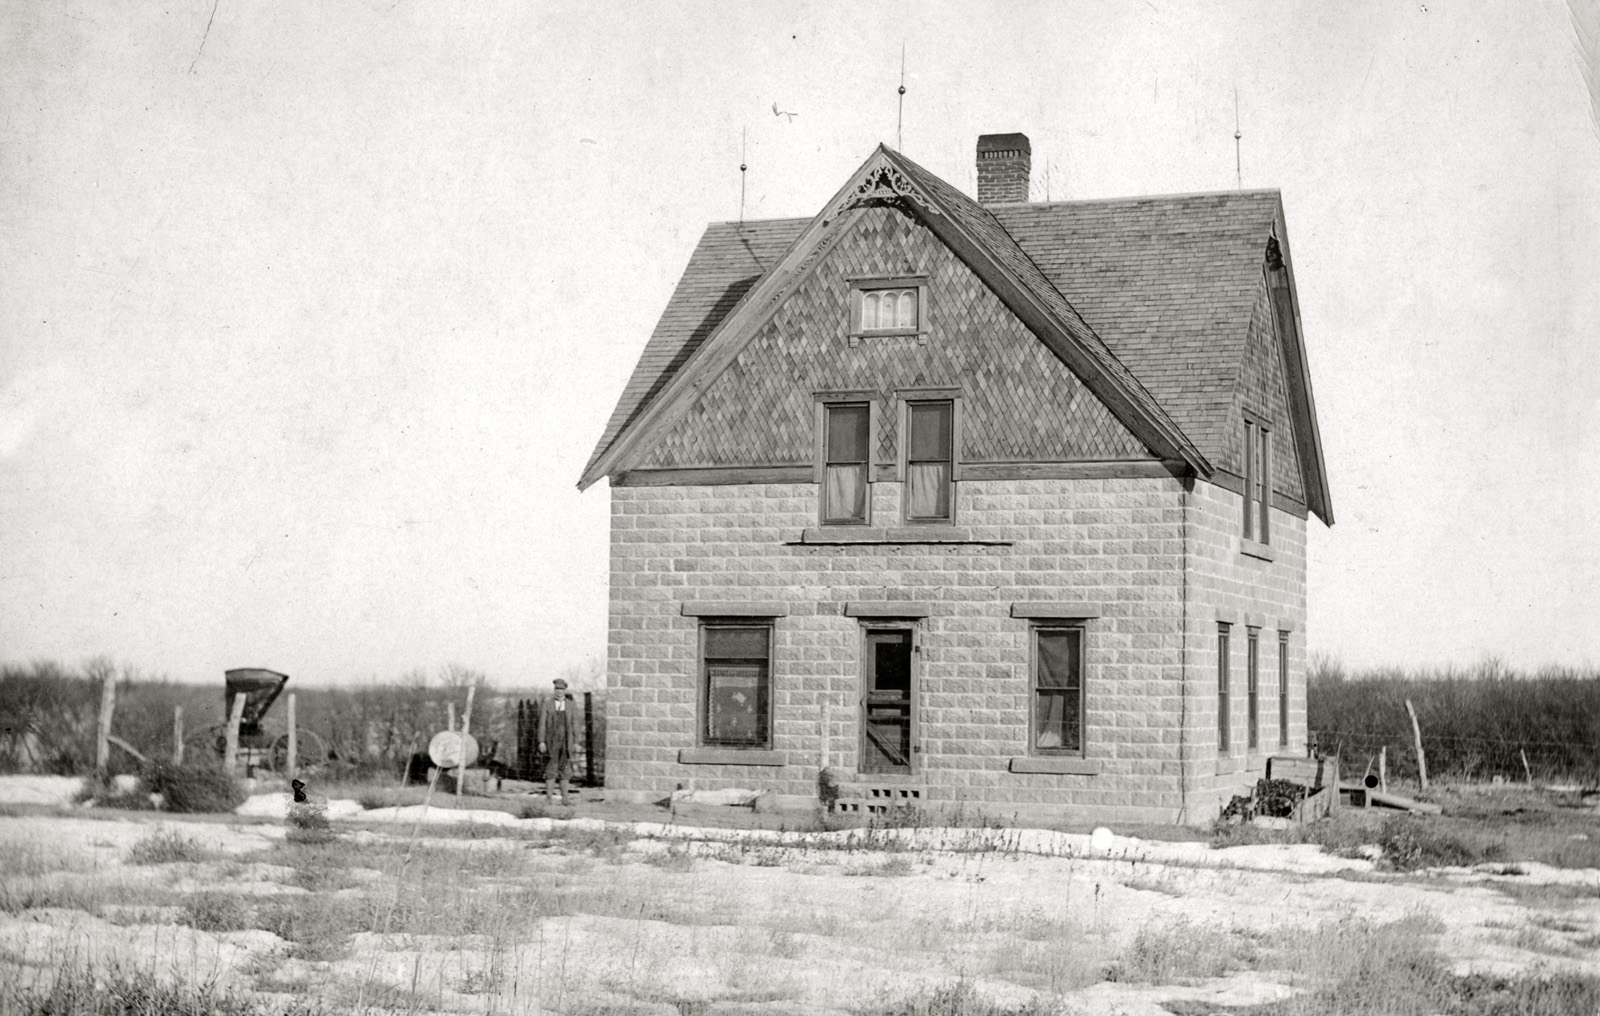 An ancestor's farmhouse under construction circa 1900 (note front steps missing). Built with site-molded concrete blocks that simulate rough -faced stone, the house was destroyed by a tornado circa 1970. The concrete blocks were reused to build a barn that still stands. View full size.